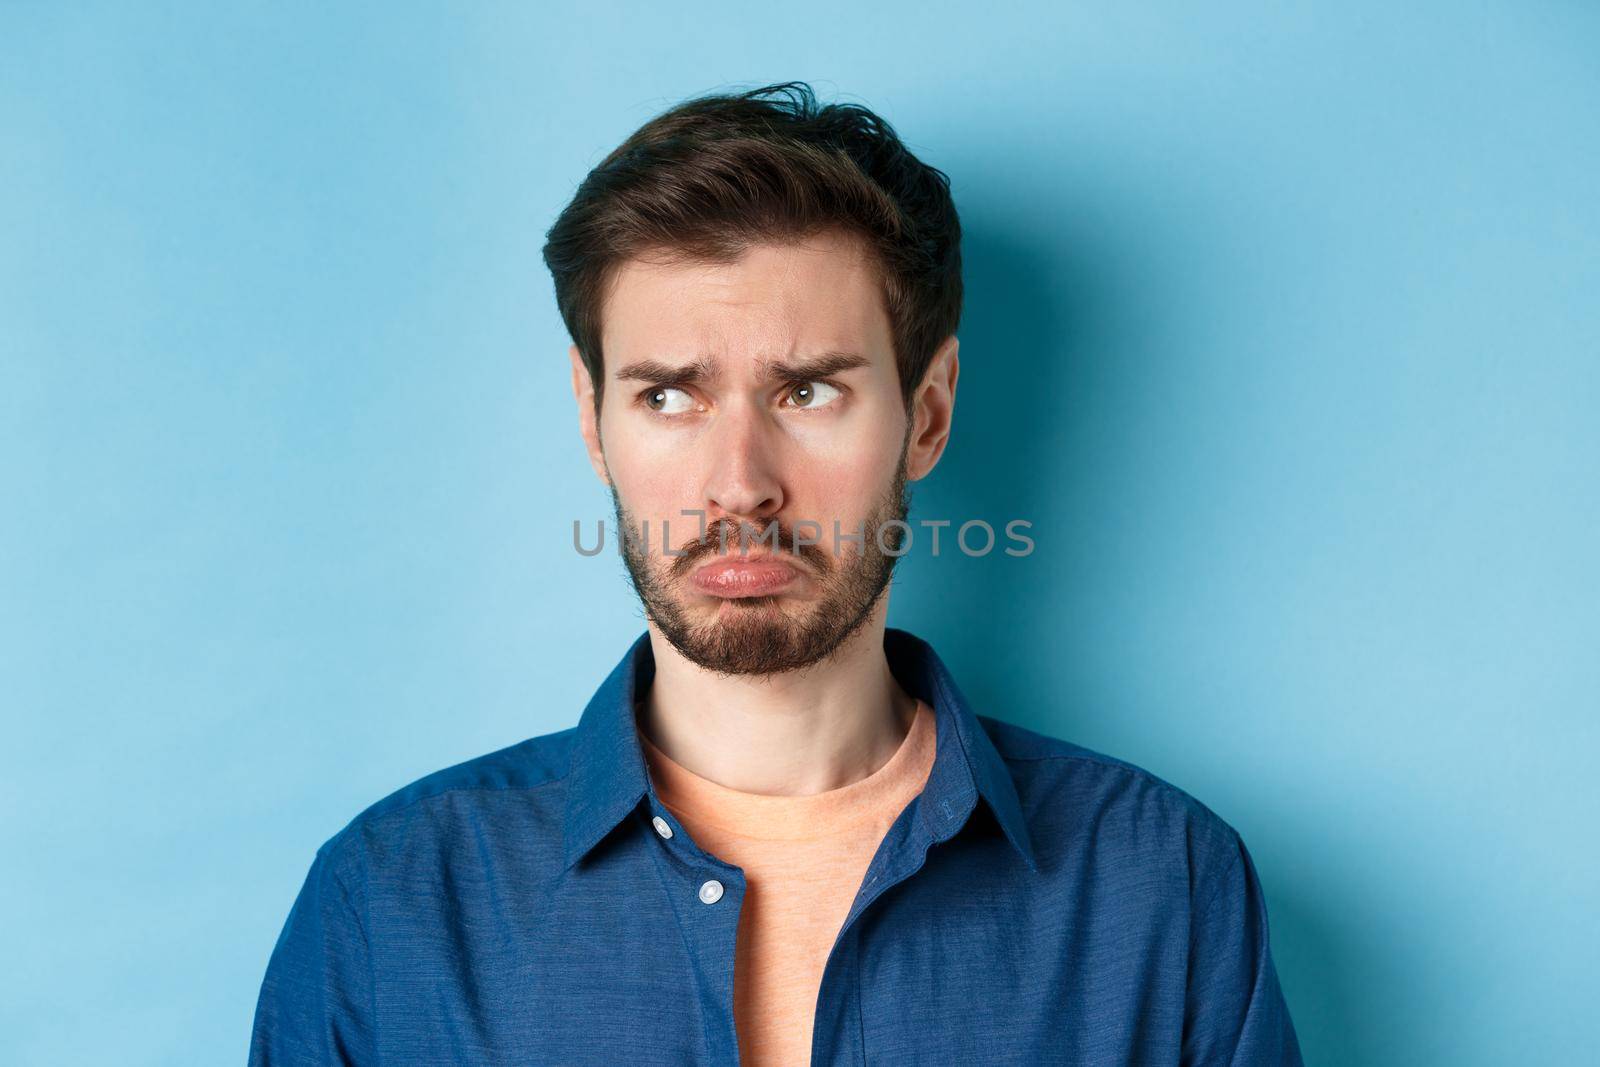 Miserable and disappointed guy acting childish, sulking and looking left at empty space with offended face, standing on blue background.